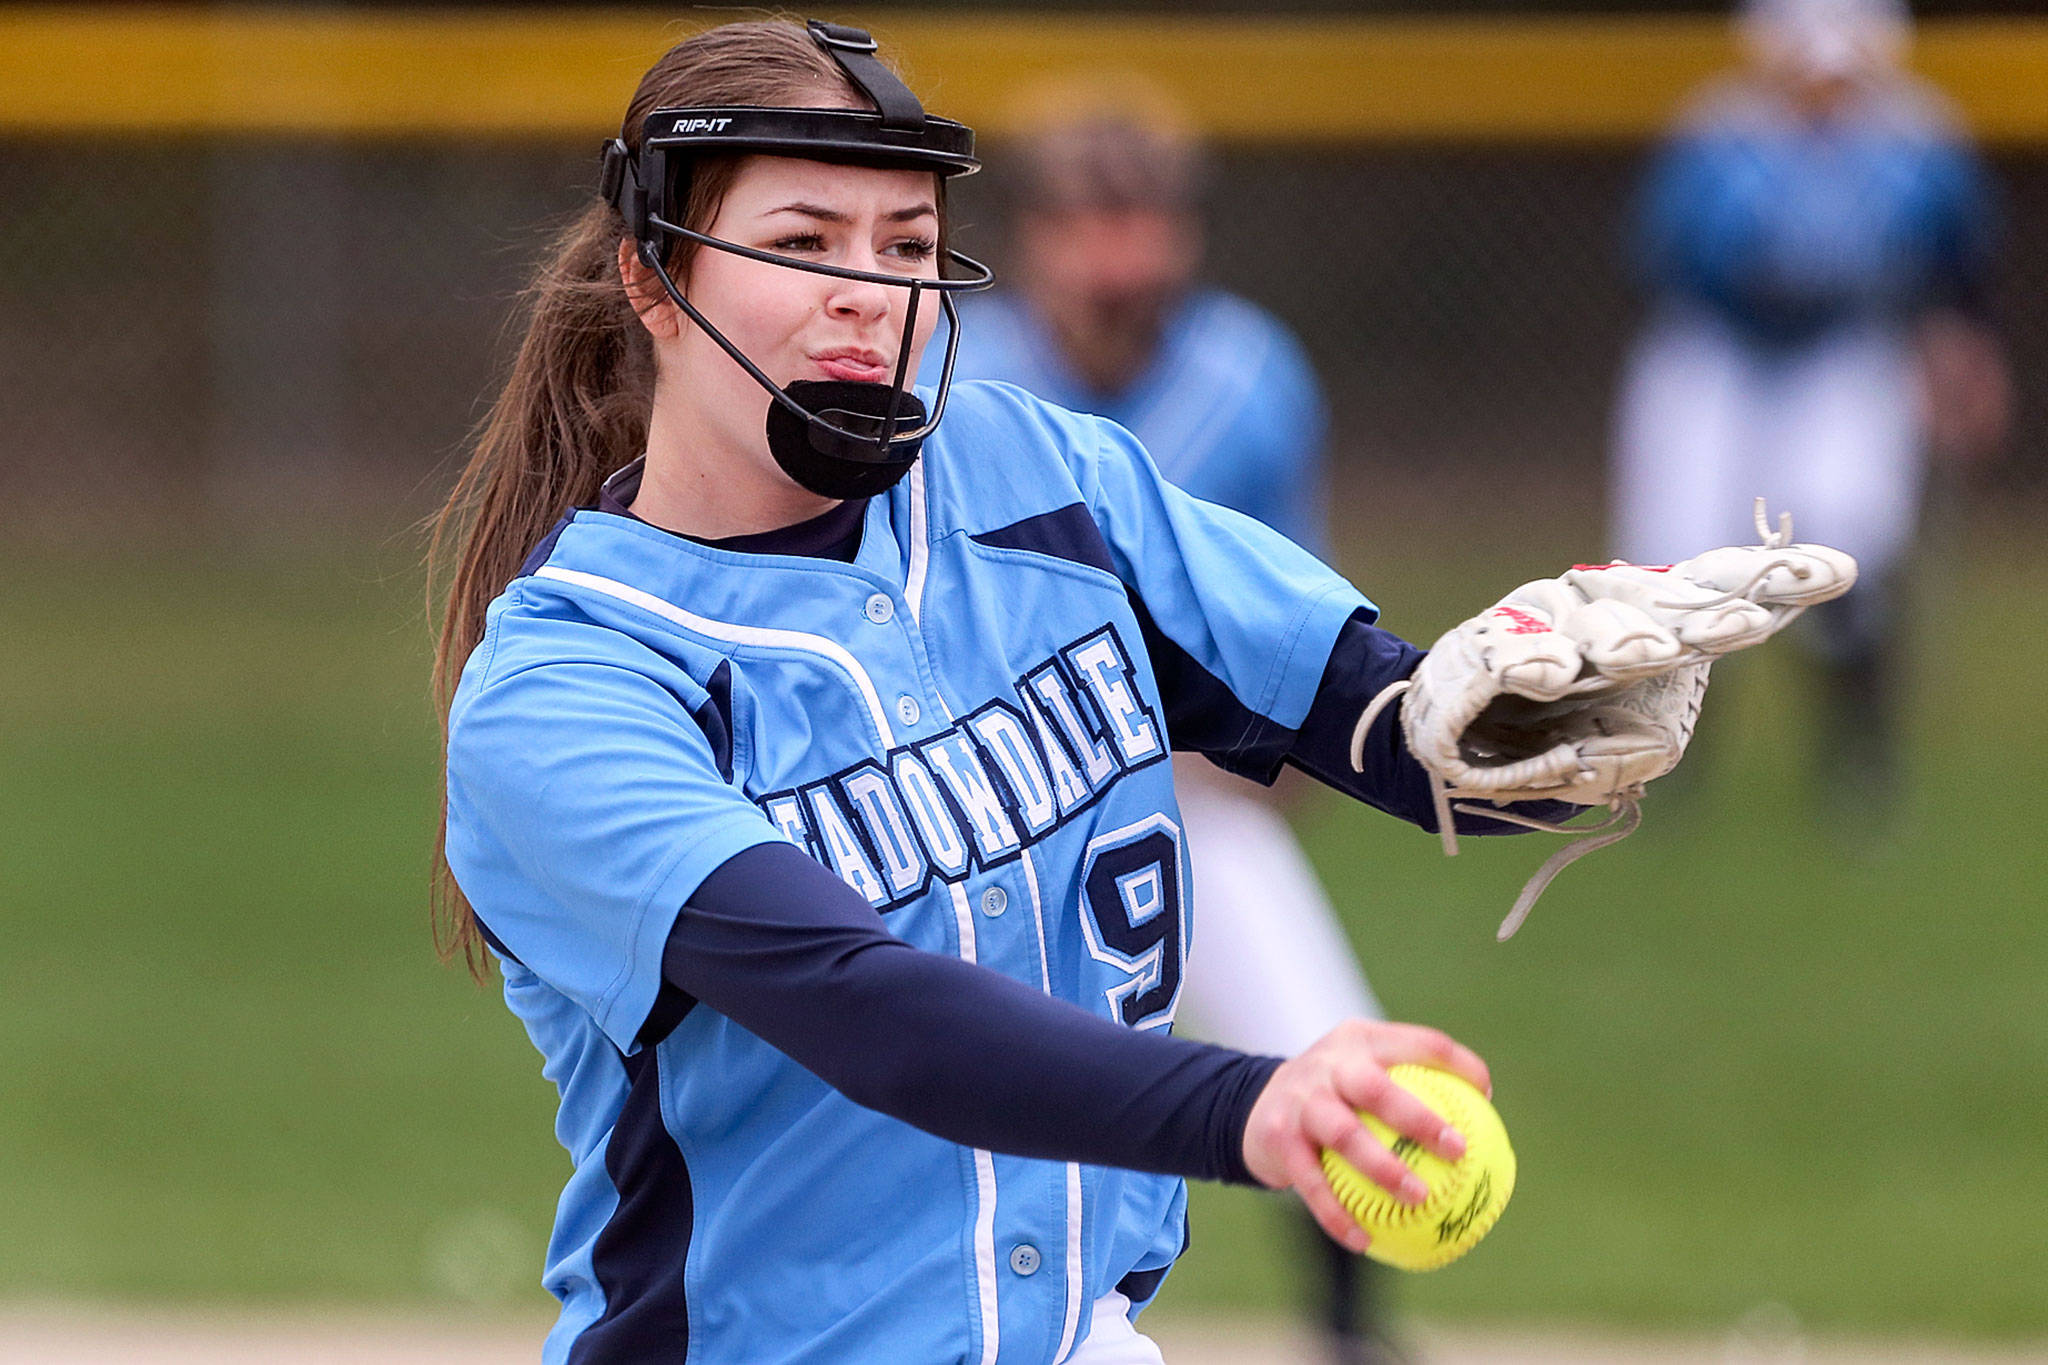 Meadowdale’s Kate Houghton throws a pitch during a game against Marysville Pilchuck in 2019 at Meadowdale High School in Lynnwood. (Kevin Clark / The Herald)